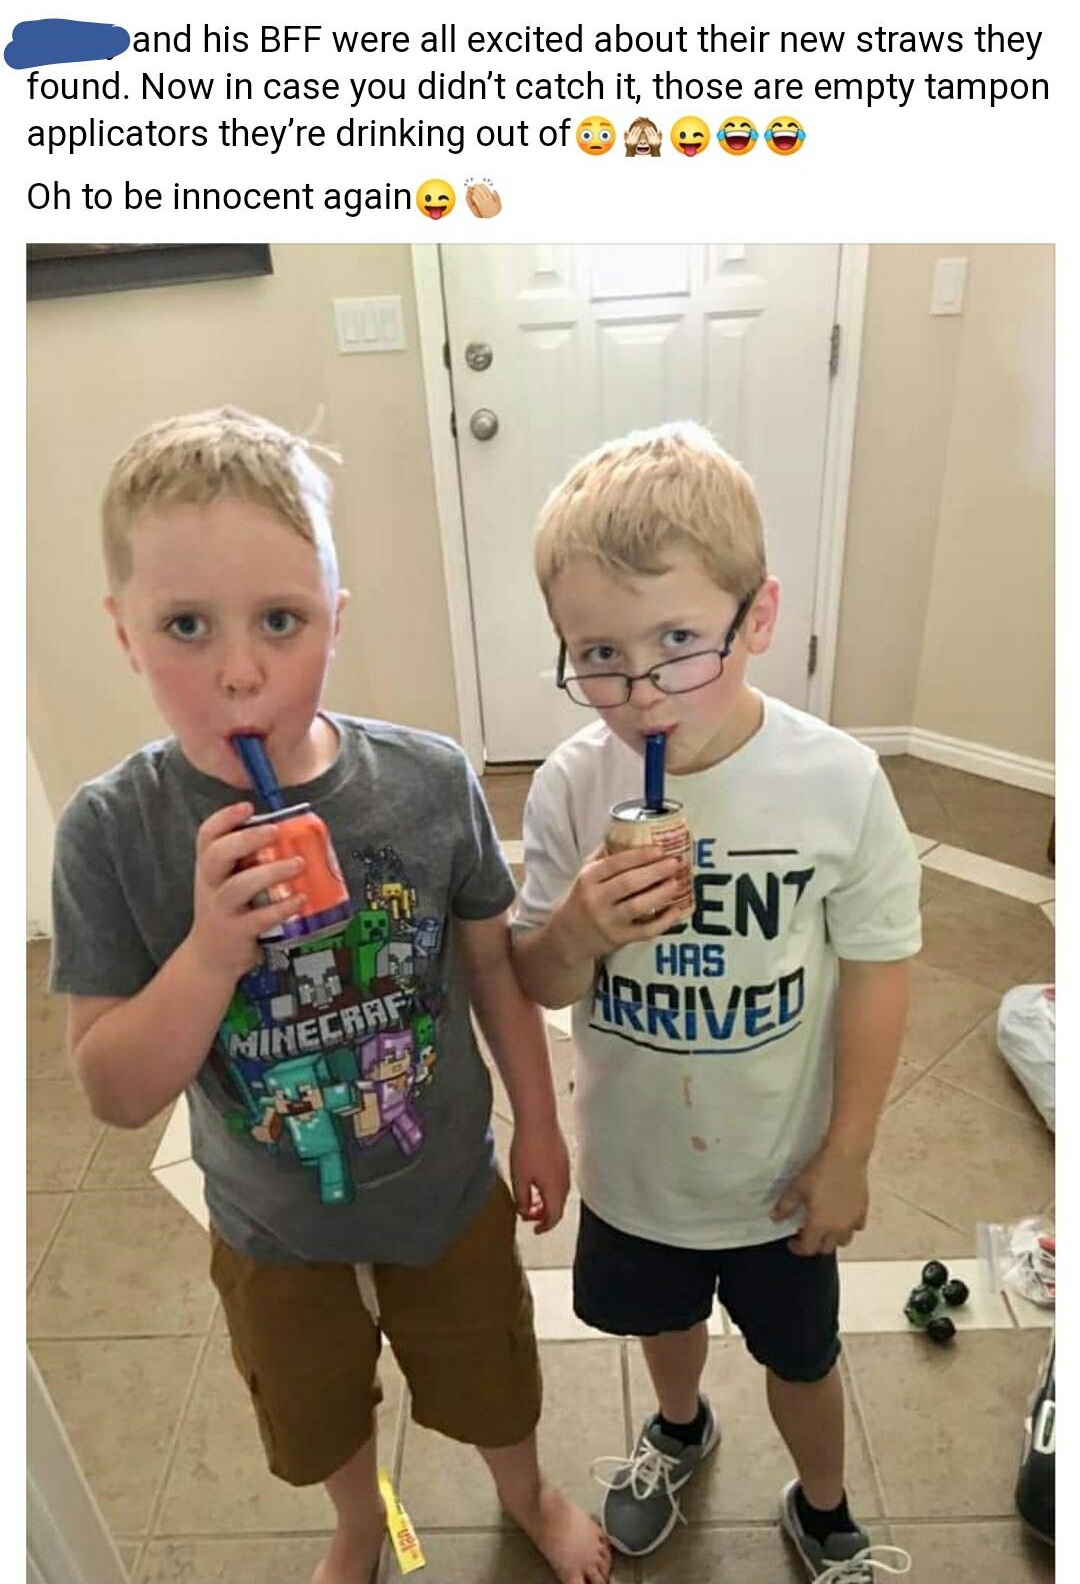 t shirt - and his Bff were all excited about their new straws they found. Now in case you didn't catch it, those are empty tampon applicators they're drinking out of Oh to be innocent again Be Ent Arrived Has Minecraf